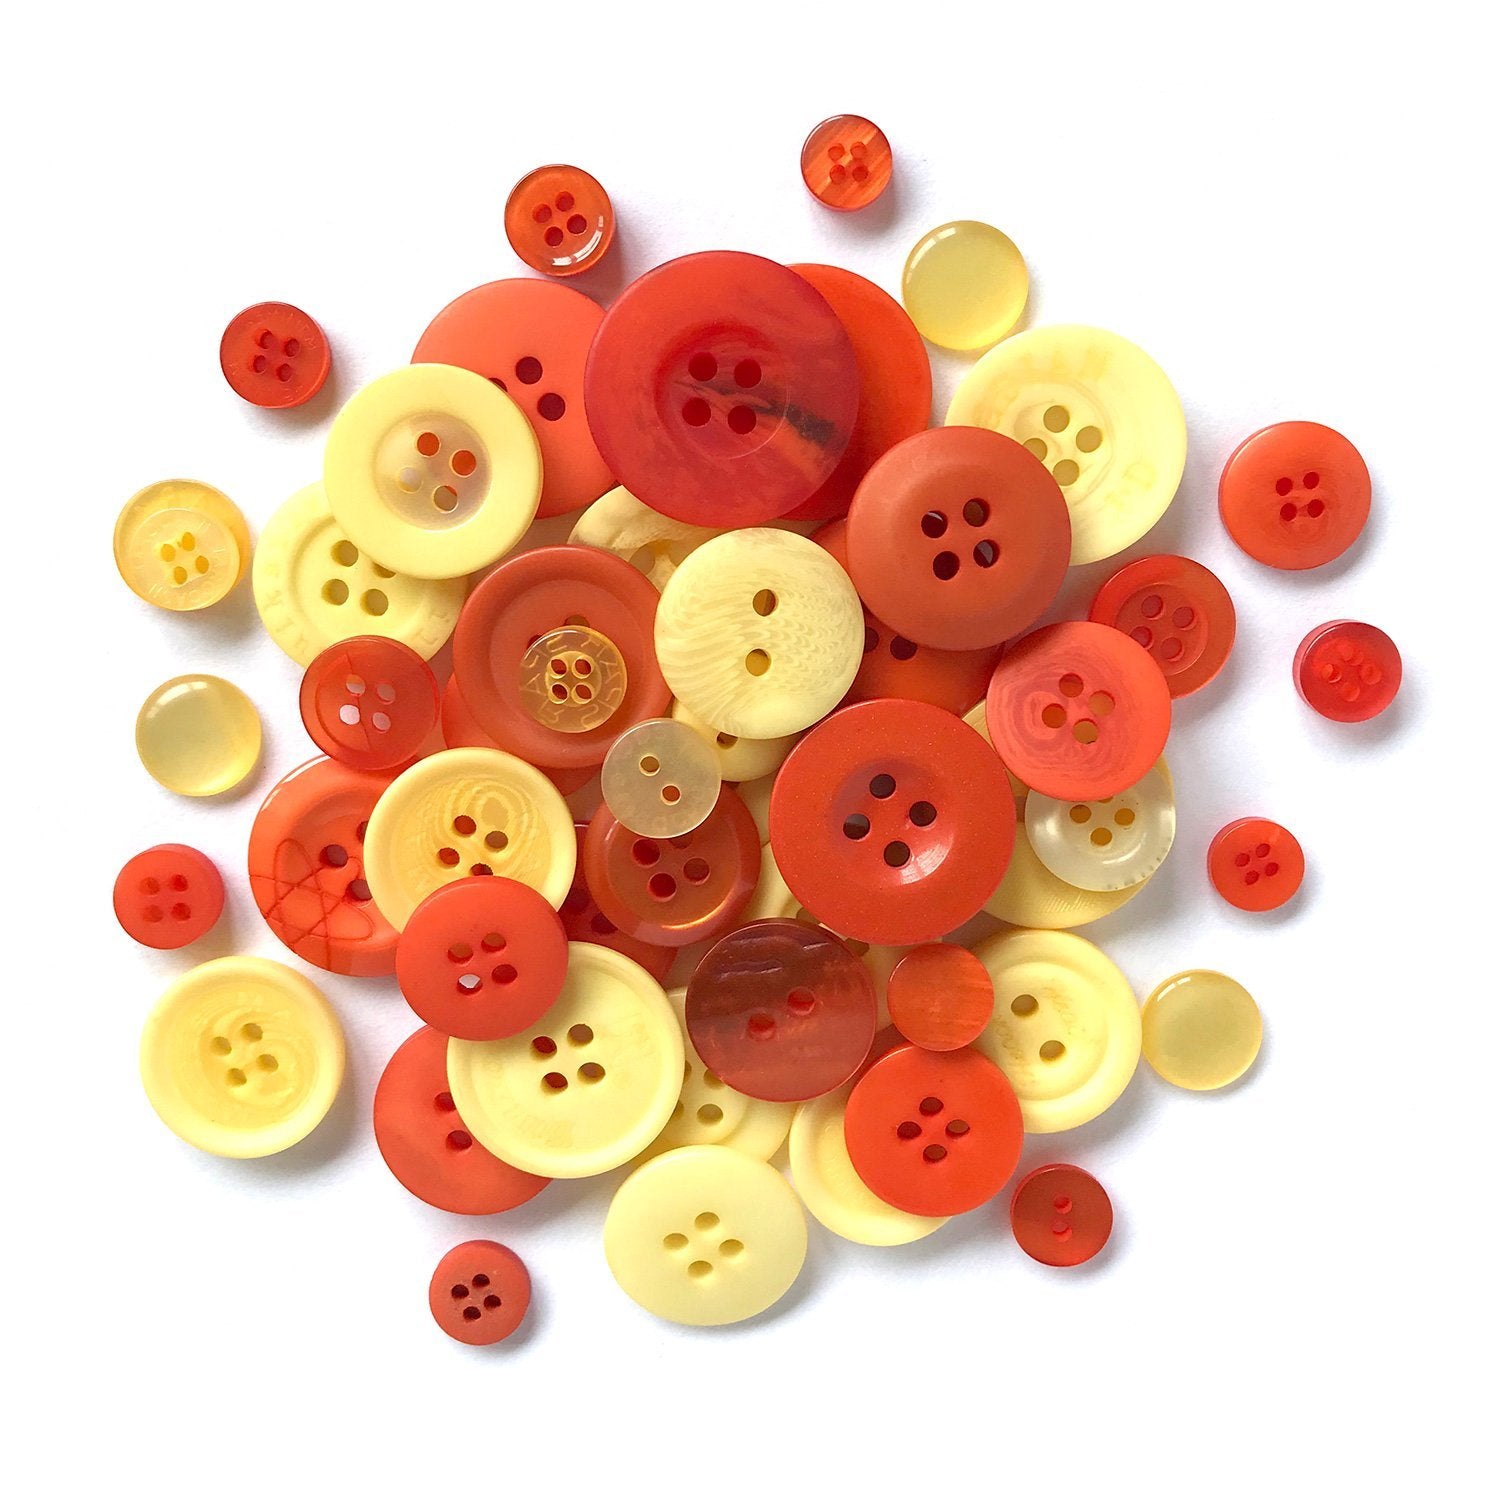 Esoca 650pcs Orange Buttons for Craft Buttons for Arts, DIY Crafts, Christmas Decoration, Sewing